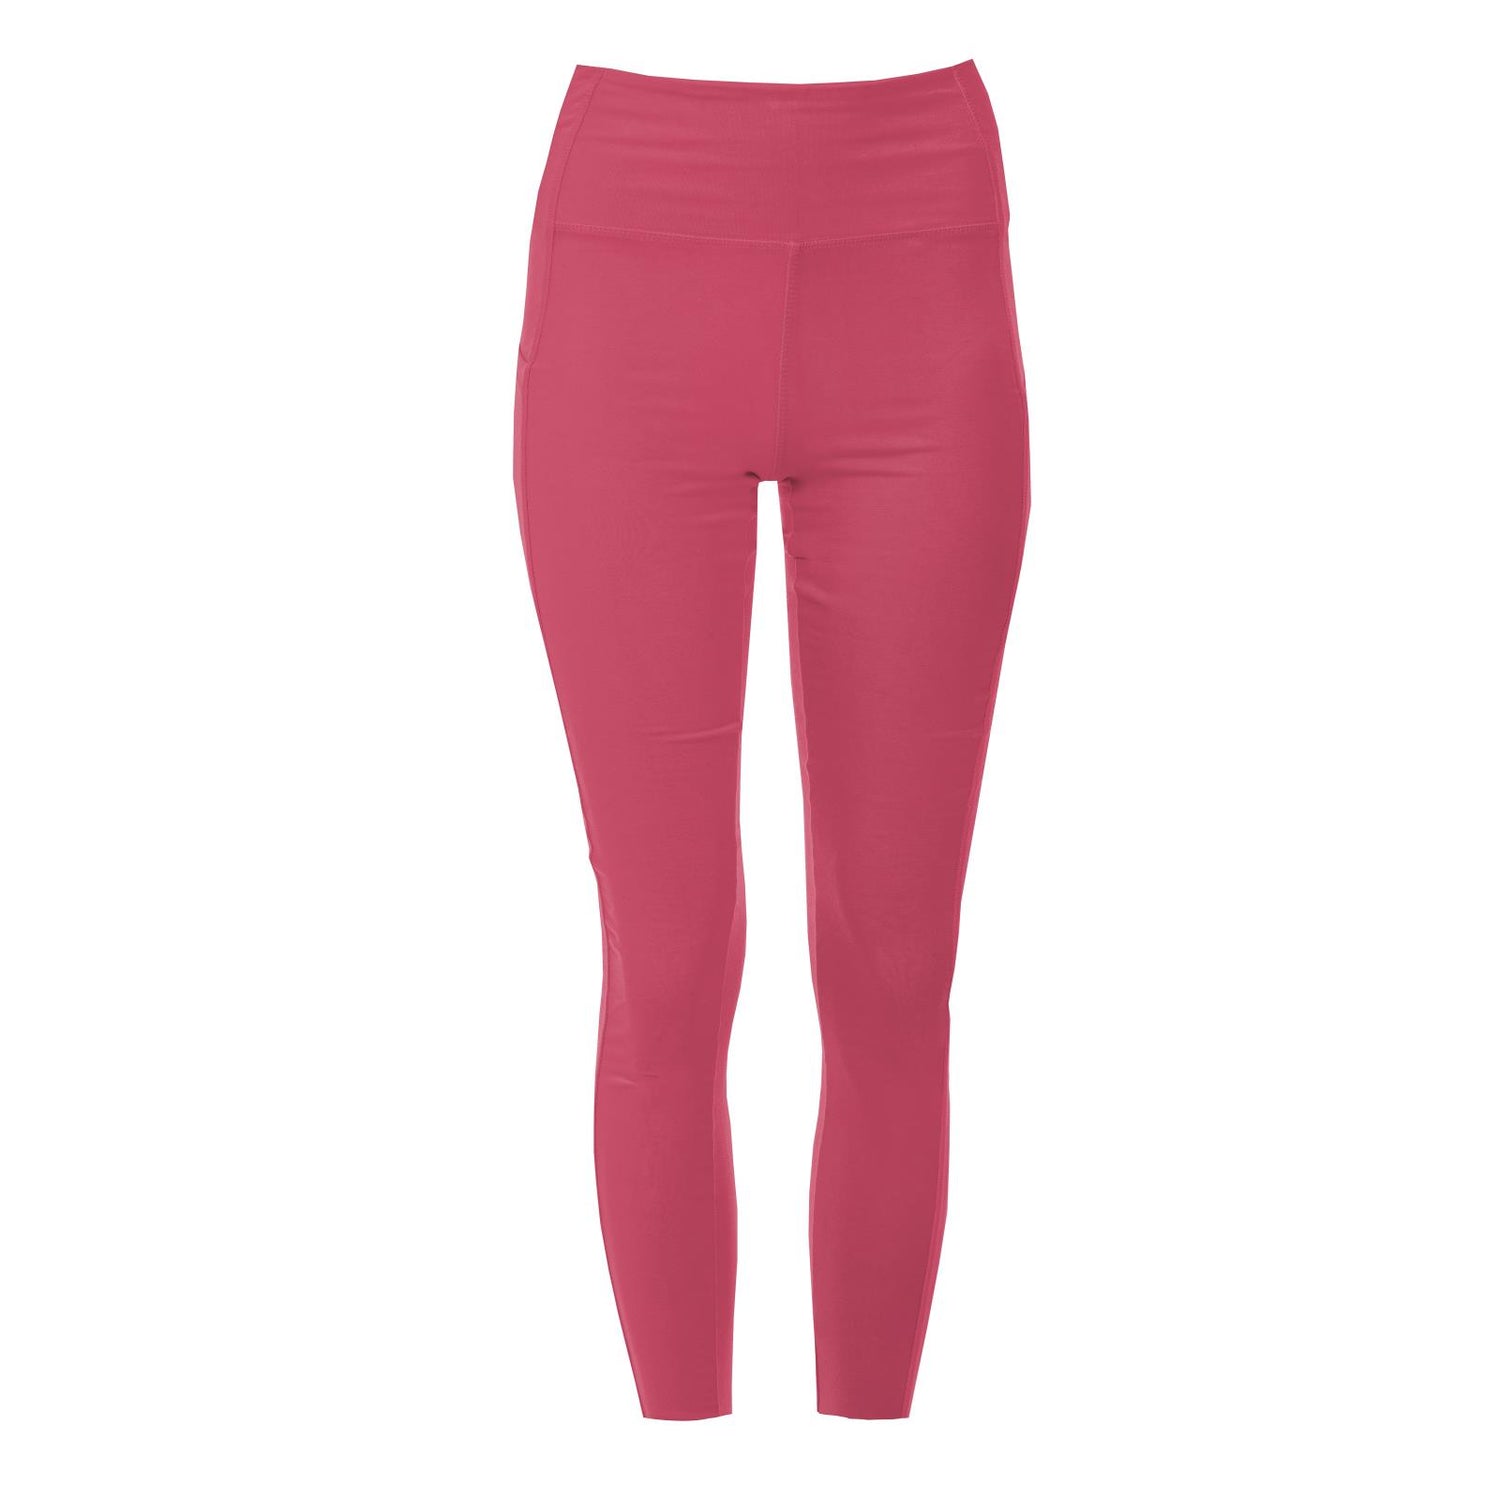 Women's Luxe Stretch 7/8 Leggings with Pockets in Taffy